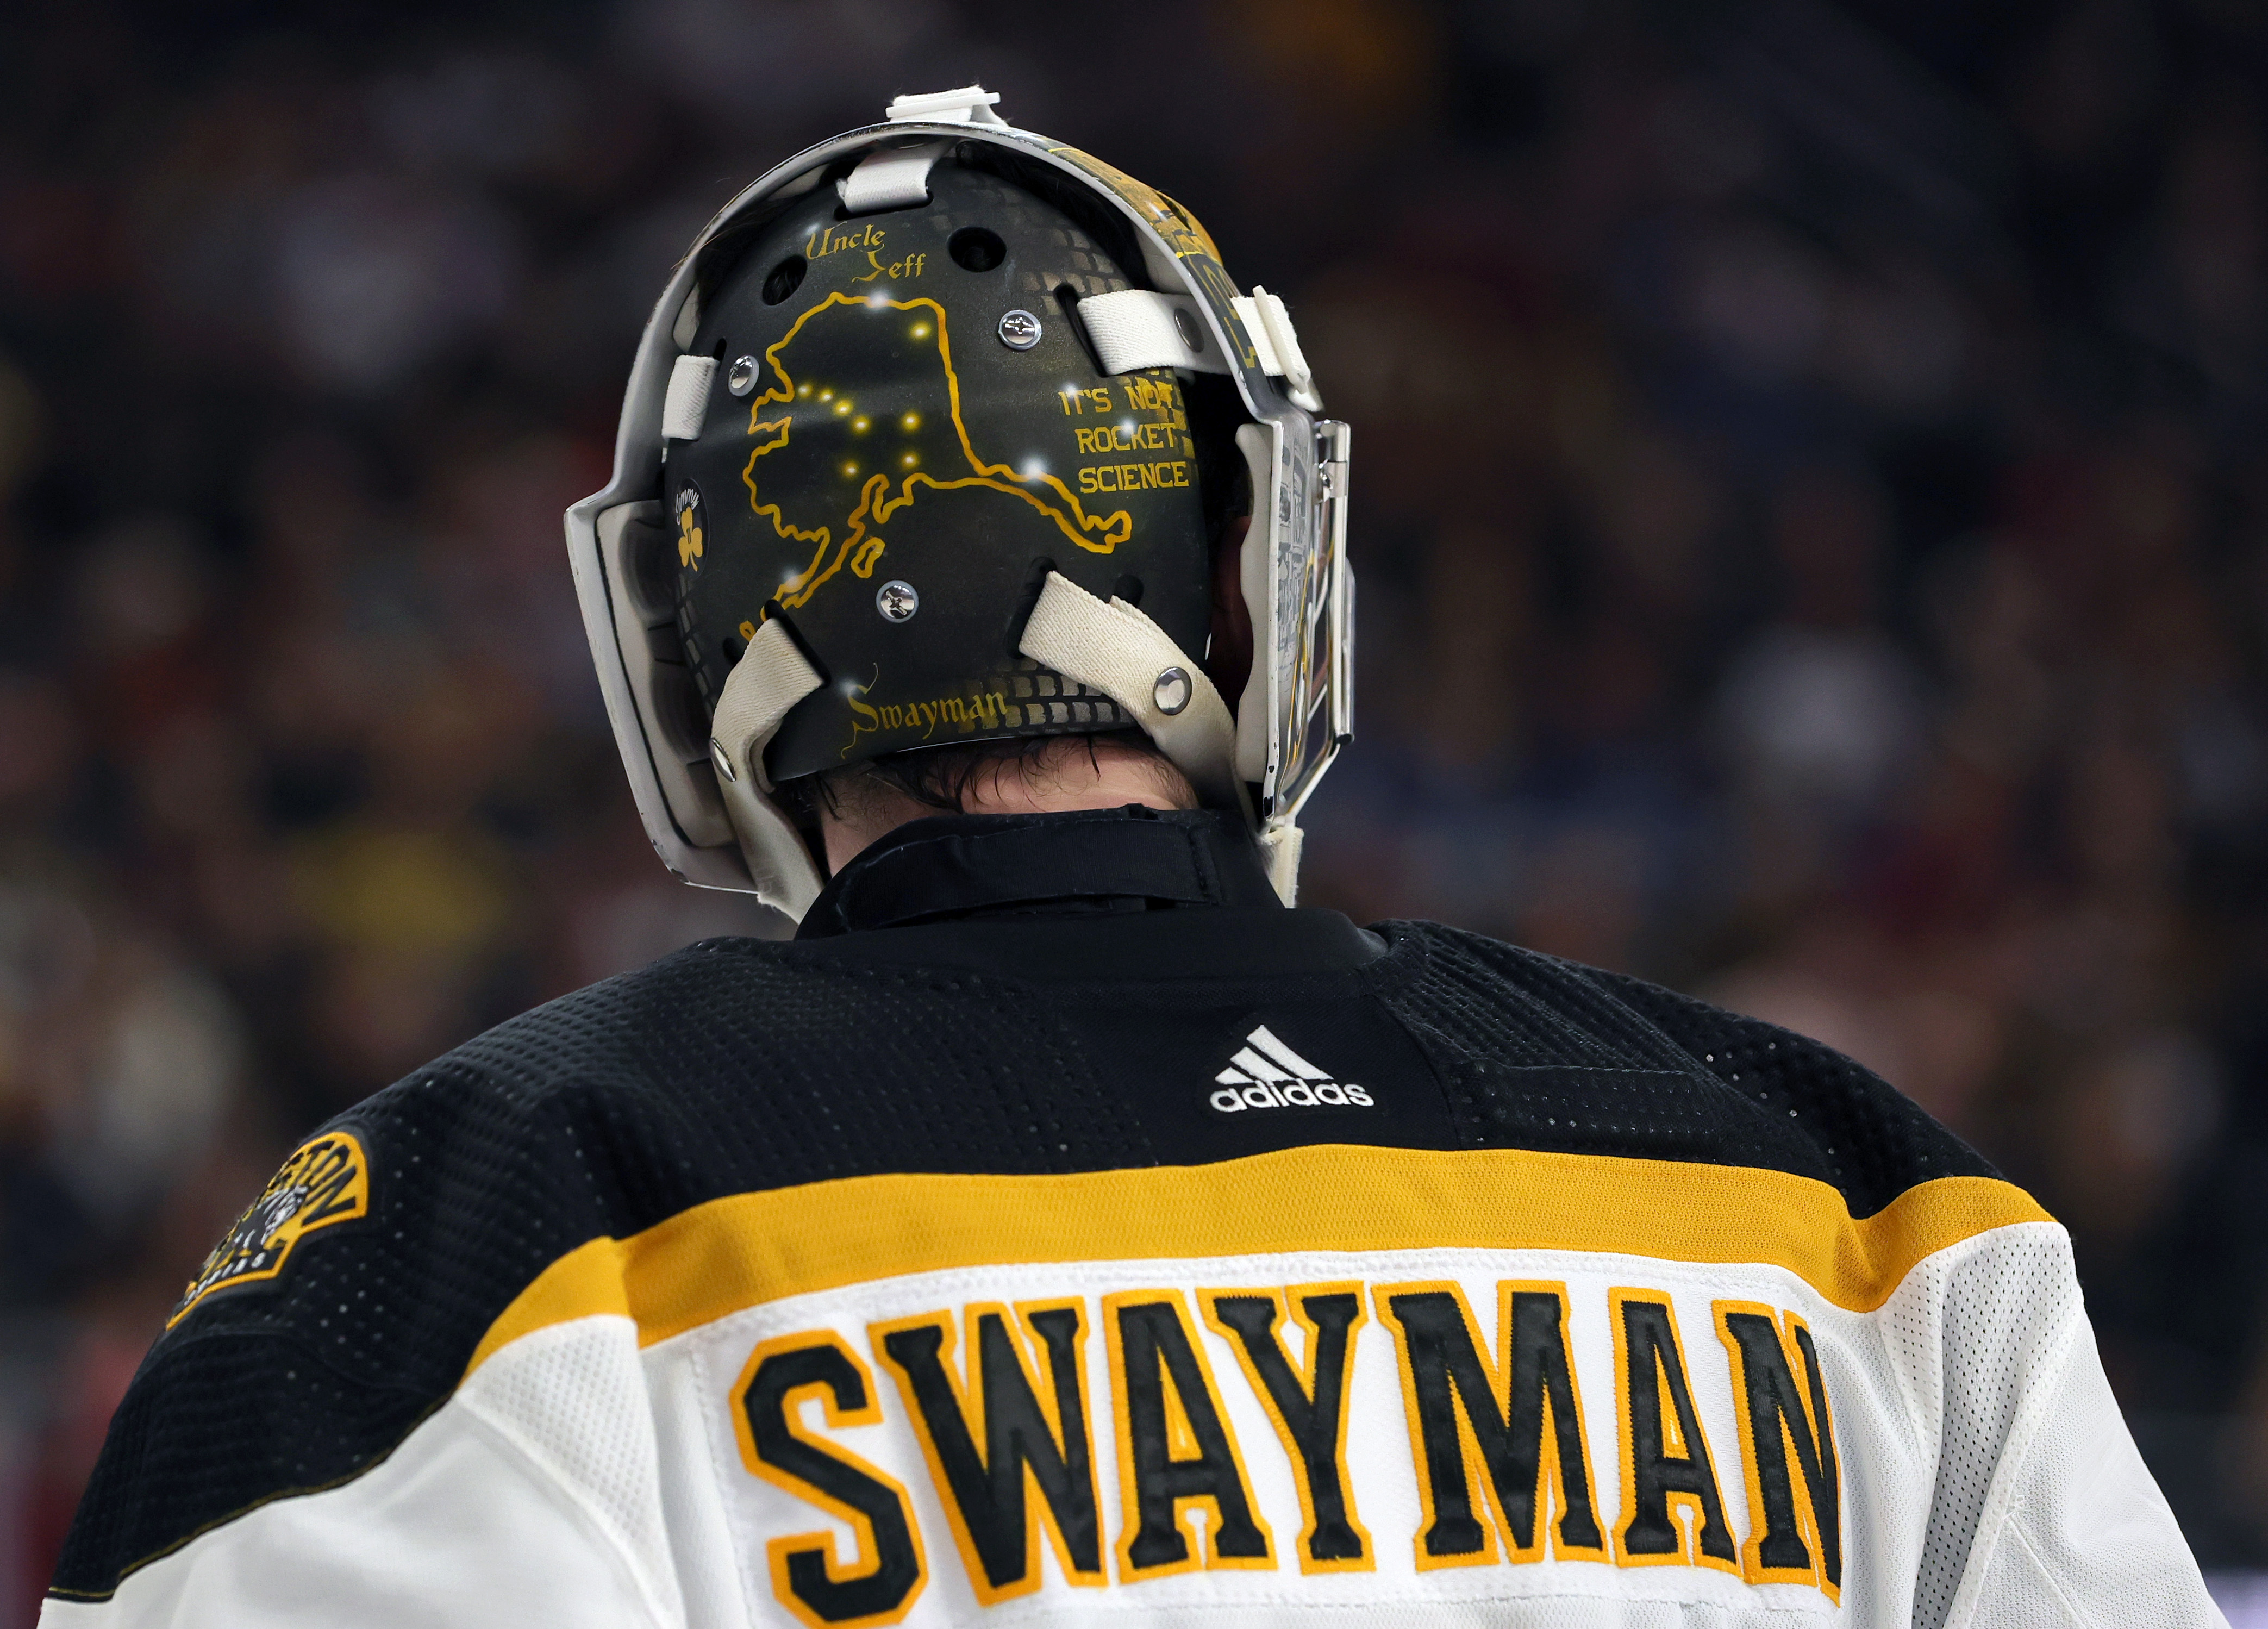 Jeremy Swayman 'couldn't be happier' staying with Bruins after